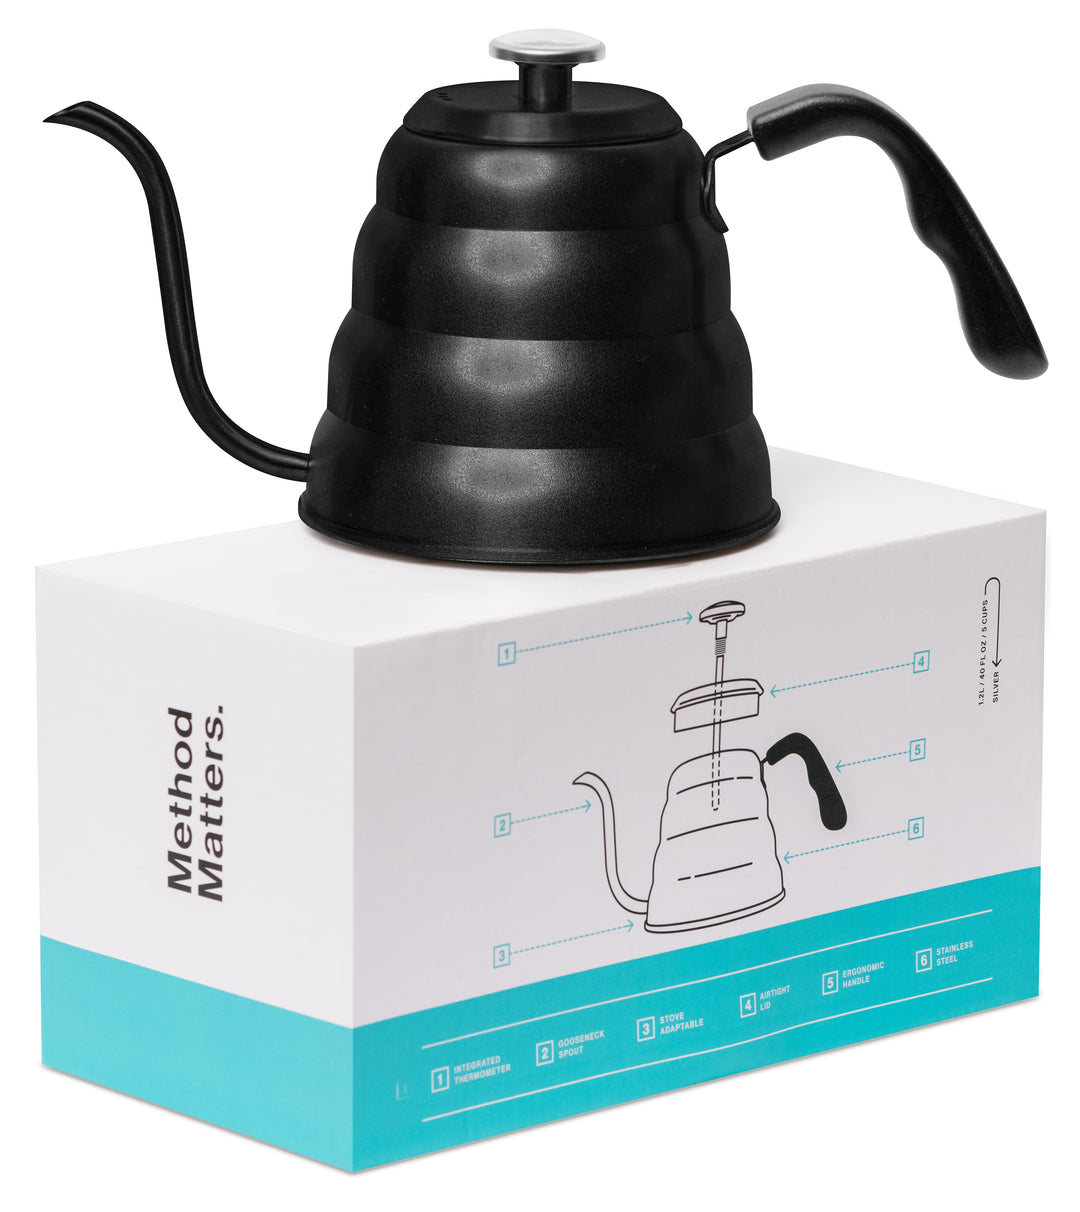 Pour Over Gooseneck Coffee Kettle with Thermometer by Barista